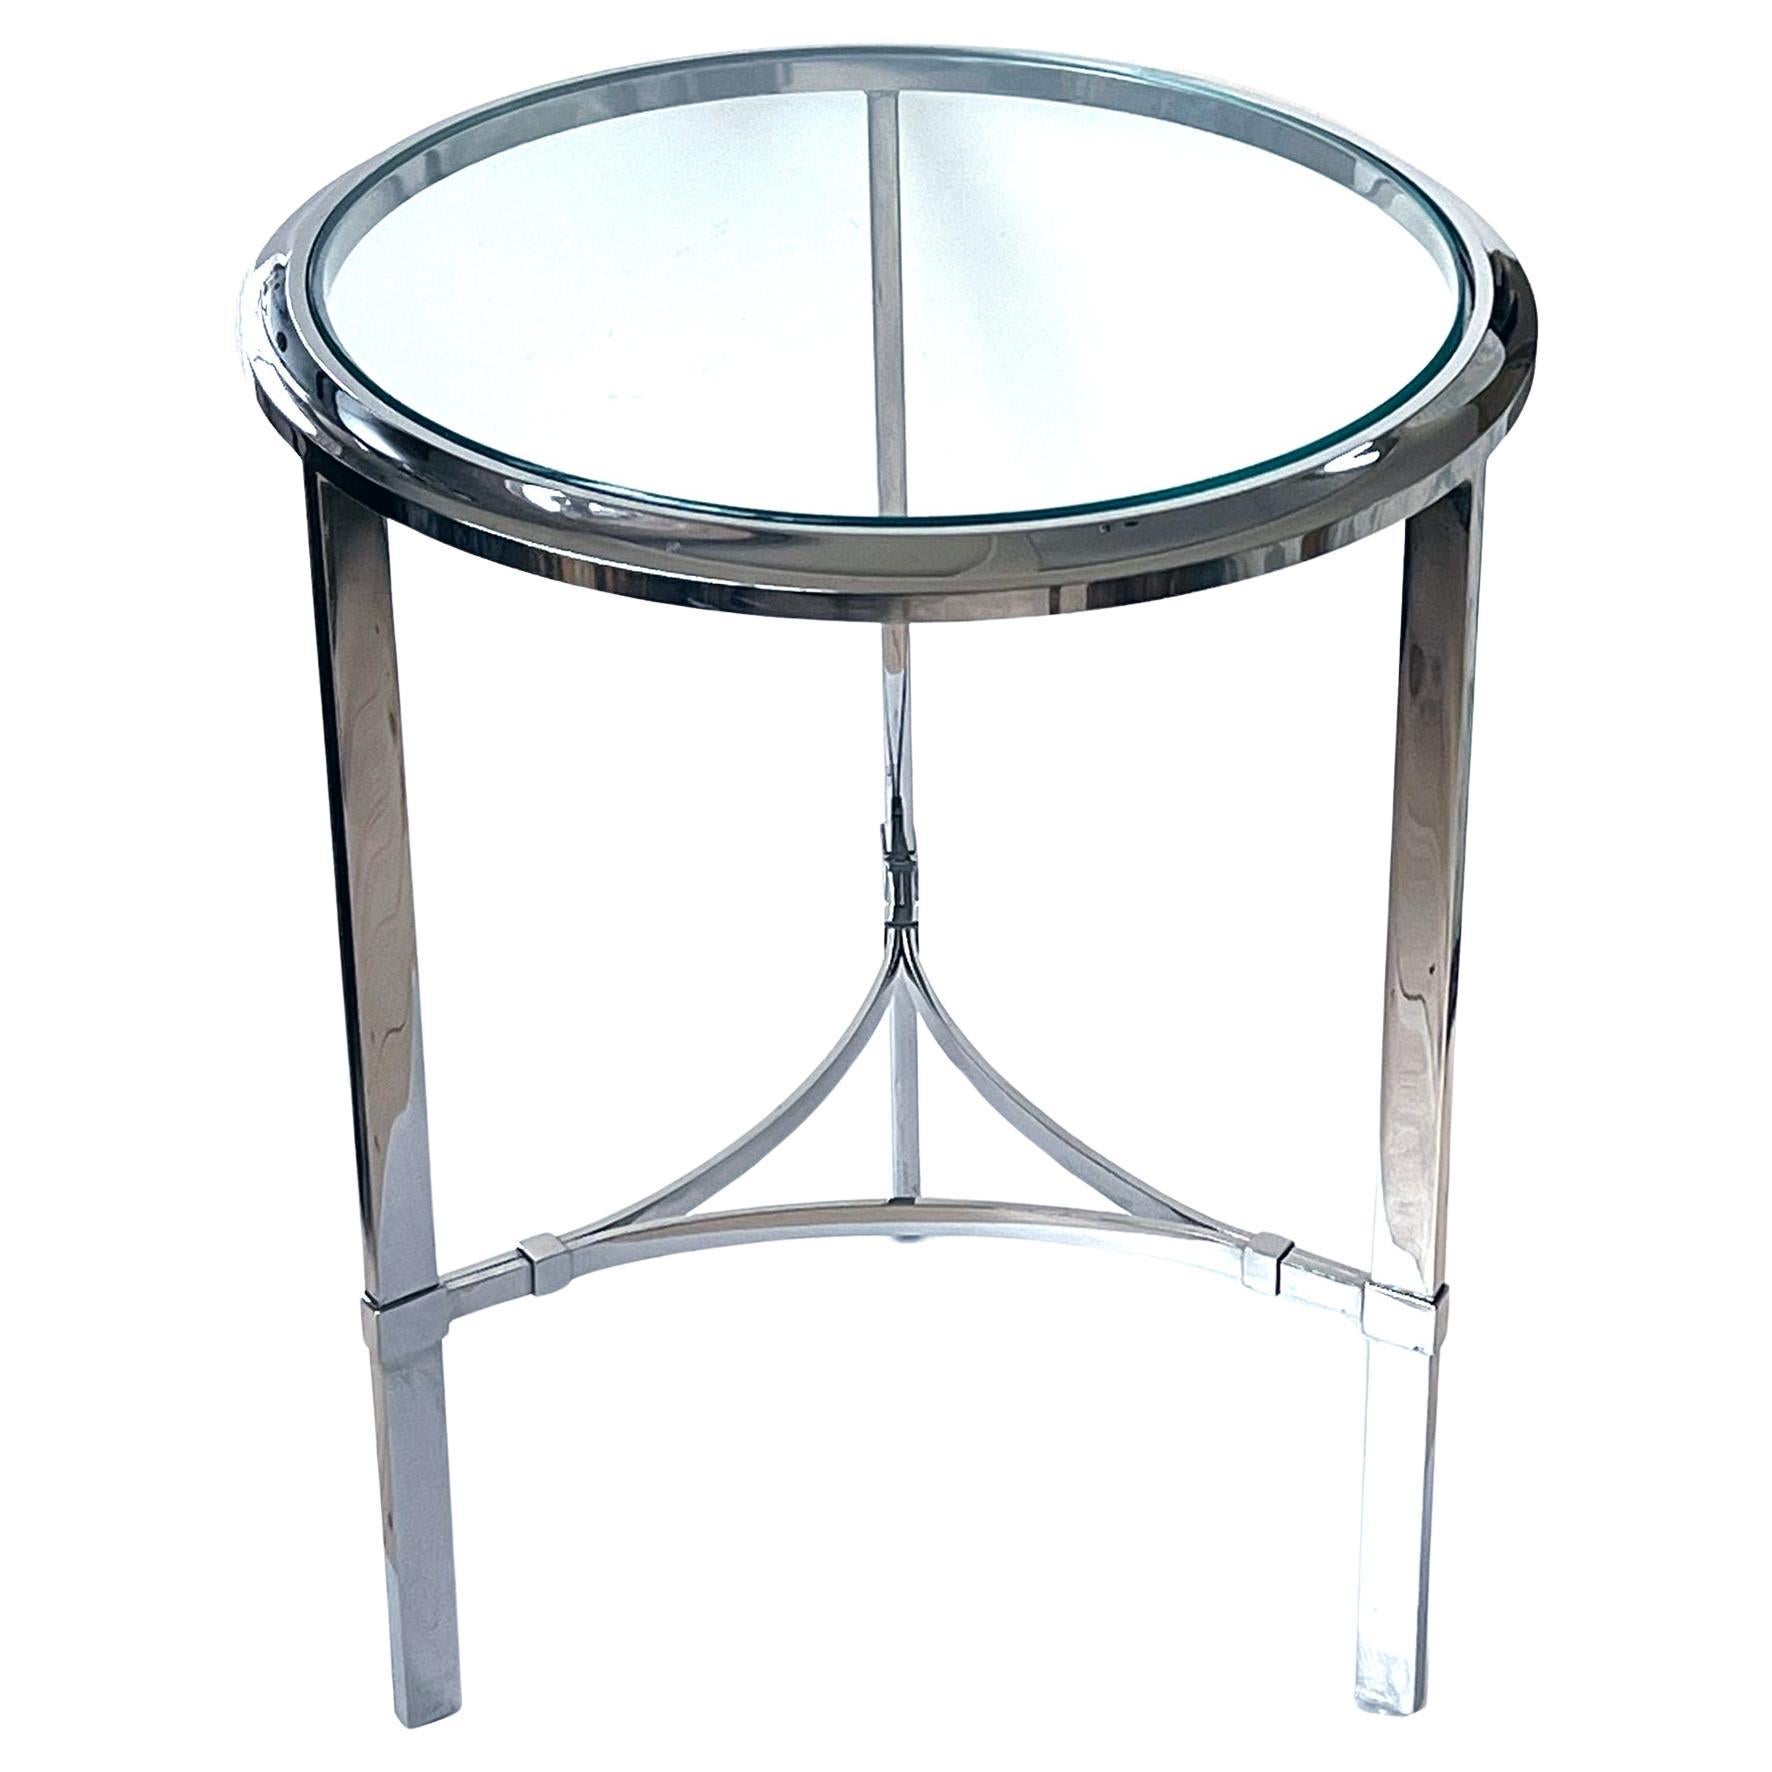 A Solid Chrome-plated Steel Circular Occasional Table with Glass Top